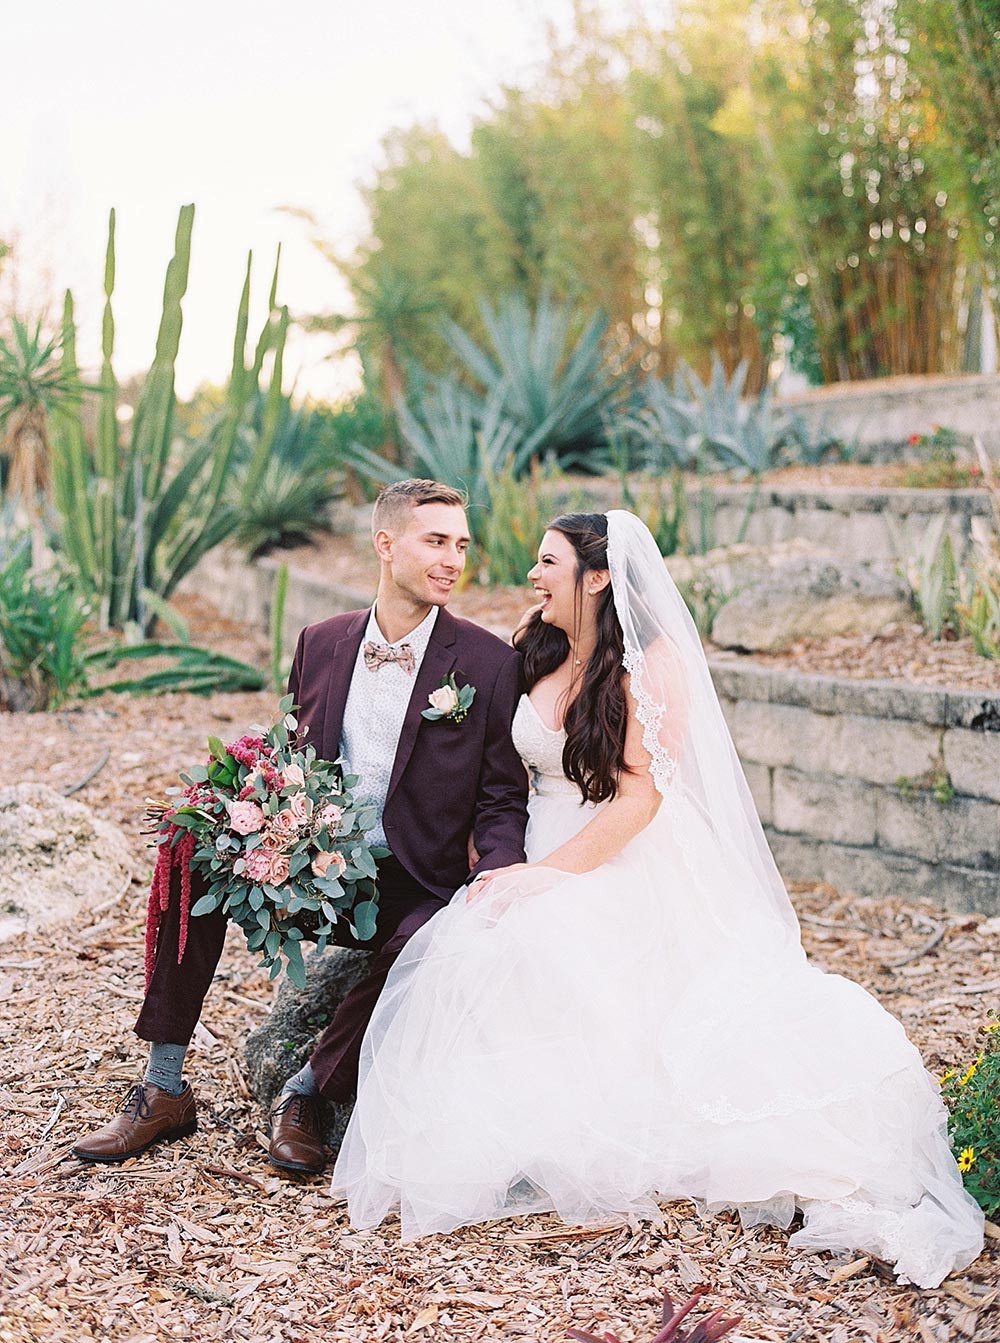 maroon groom suit and strapless wedding dress with veil